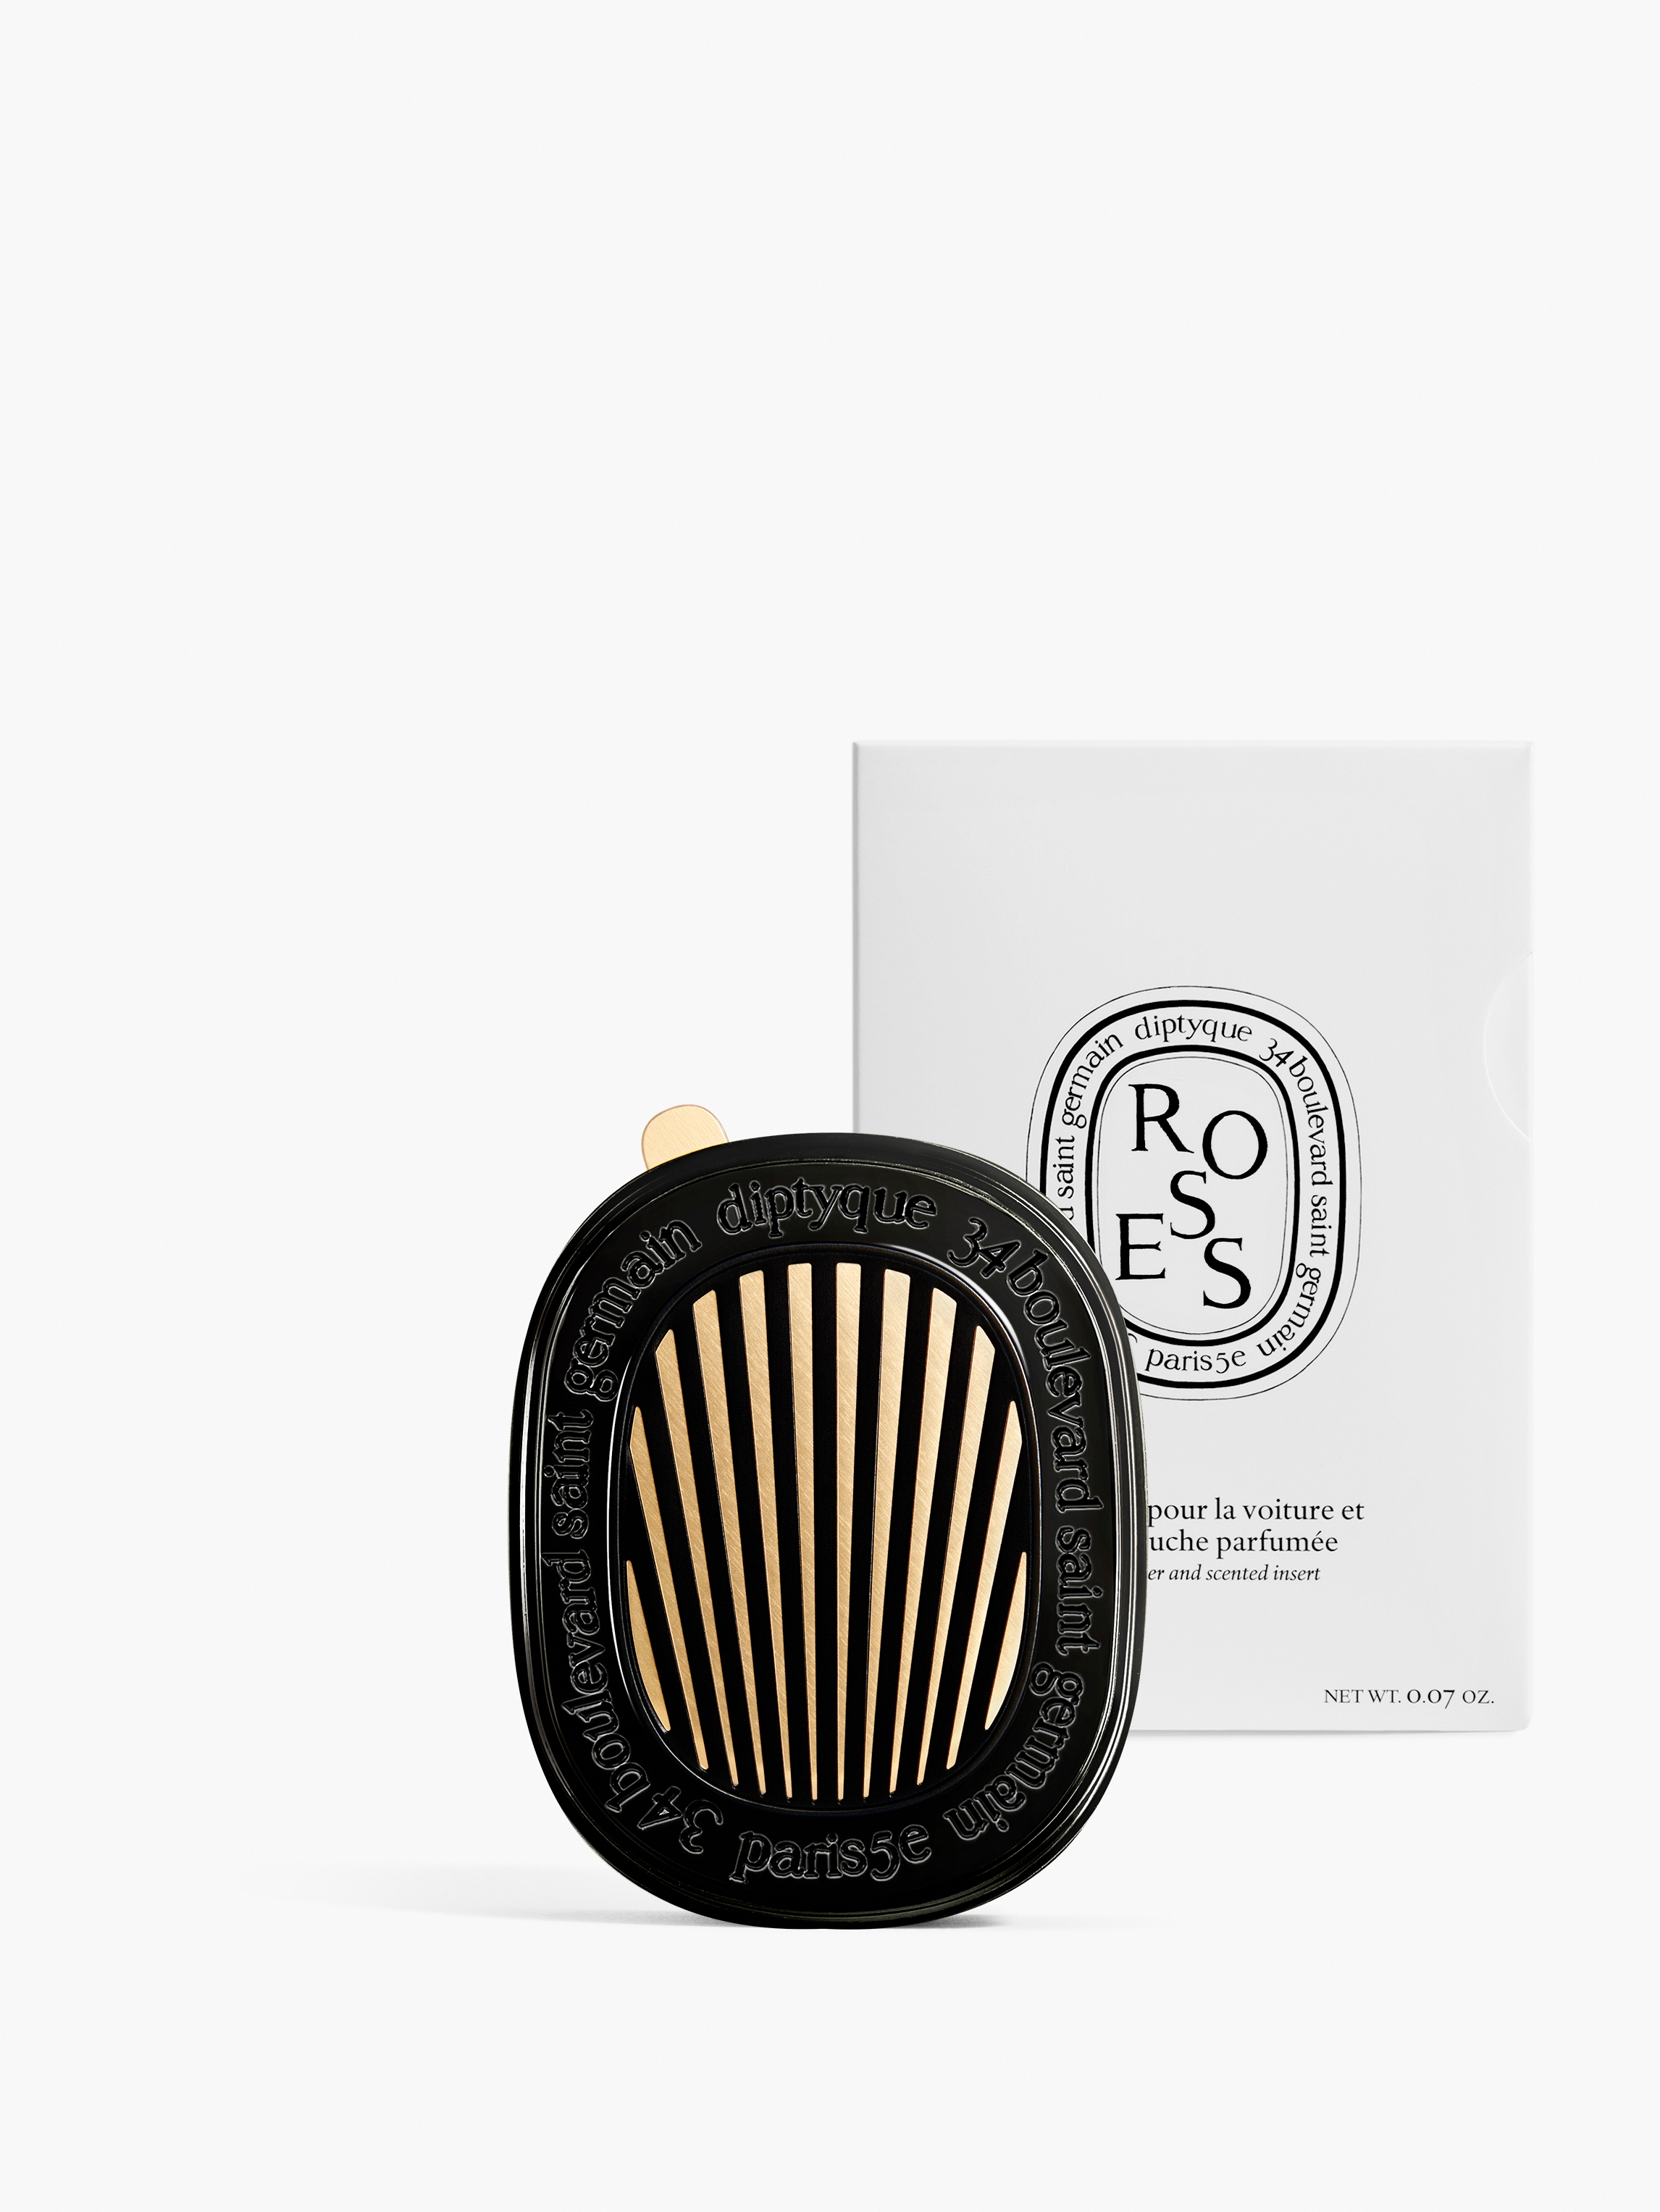 https://www.diptyqueparis.com/media/catalog/product/d/i/diptyque-car-diffuser-with-roses-insert-cardifro-1.jpg?quality=100&bg-color=255,255,255&fit=bounds&height=&width=